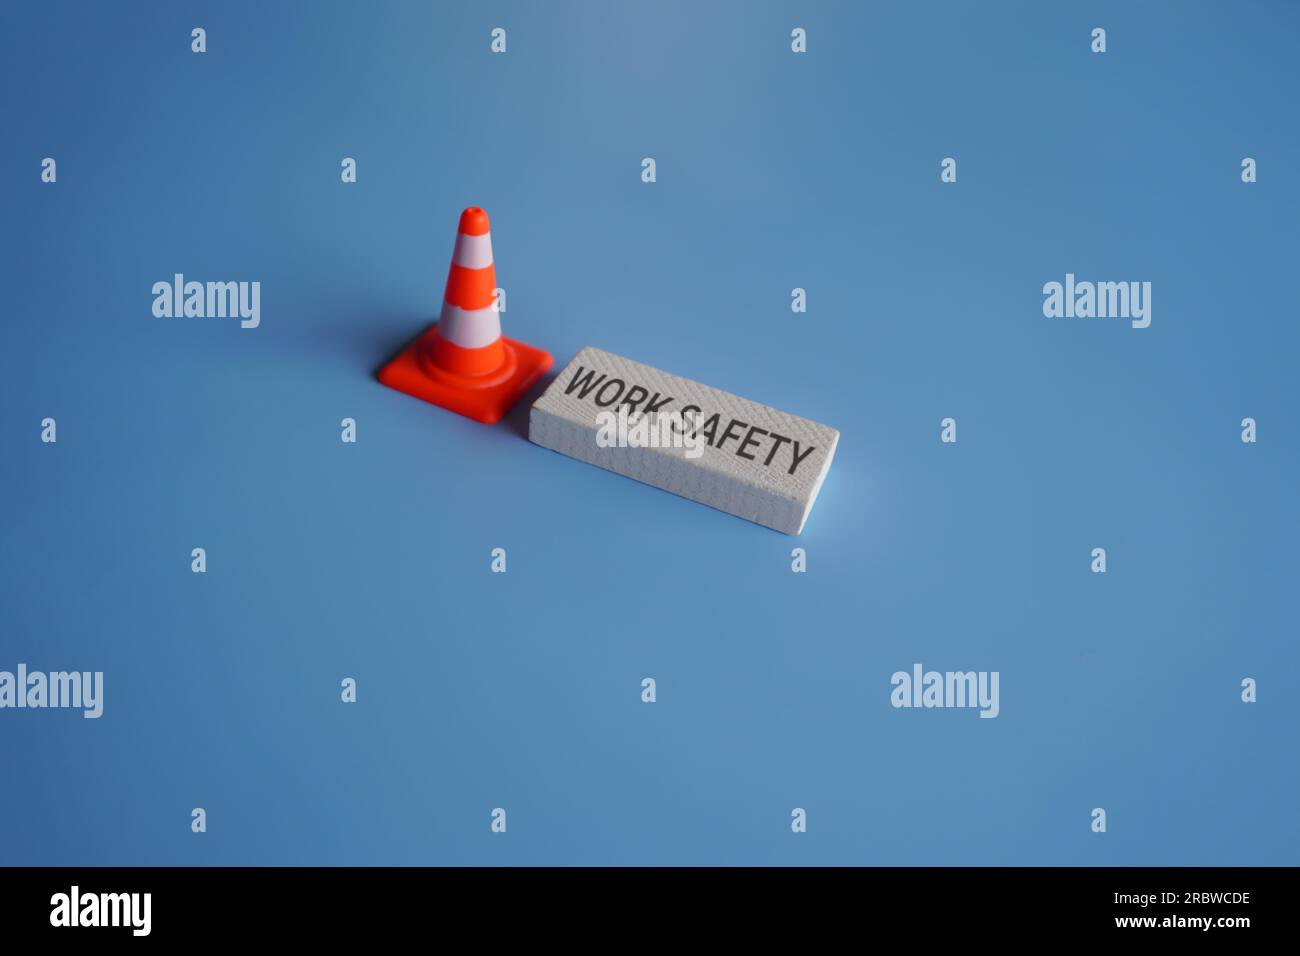 Traffic safety cone and text WORK SAFETY on blue background. Safety at workplace concept Stock Photo